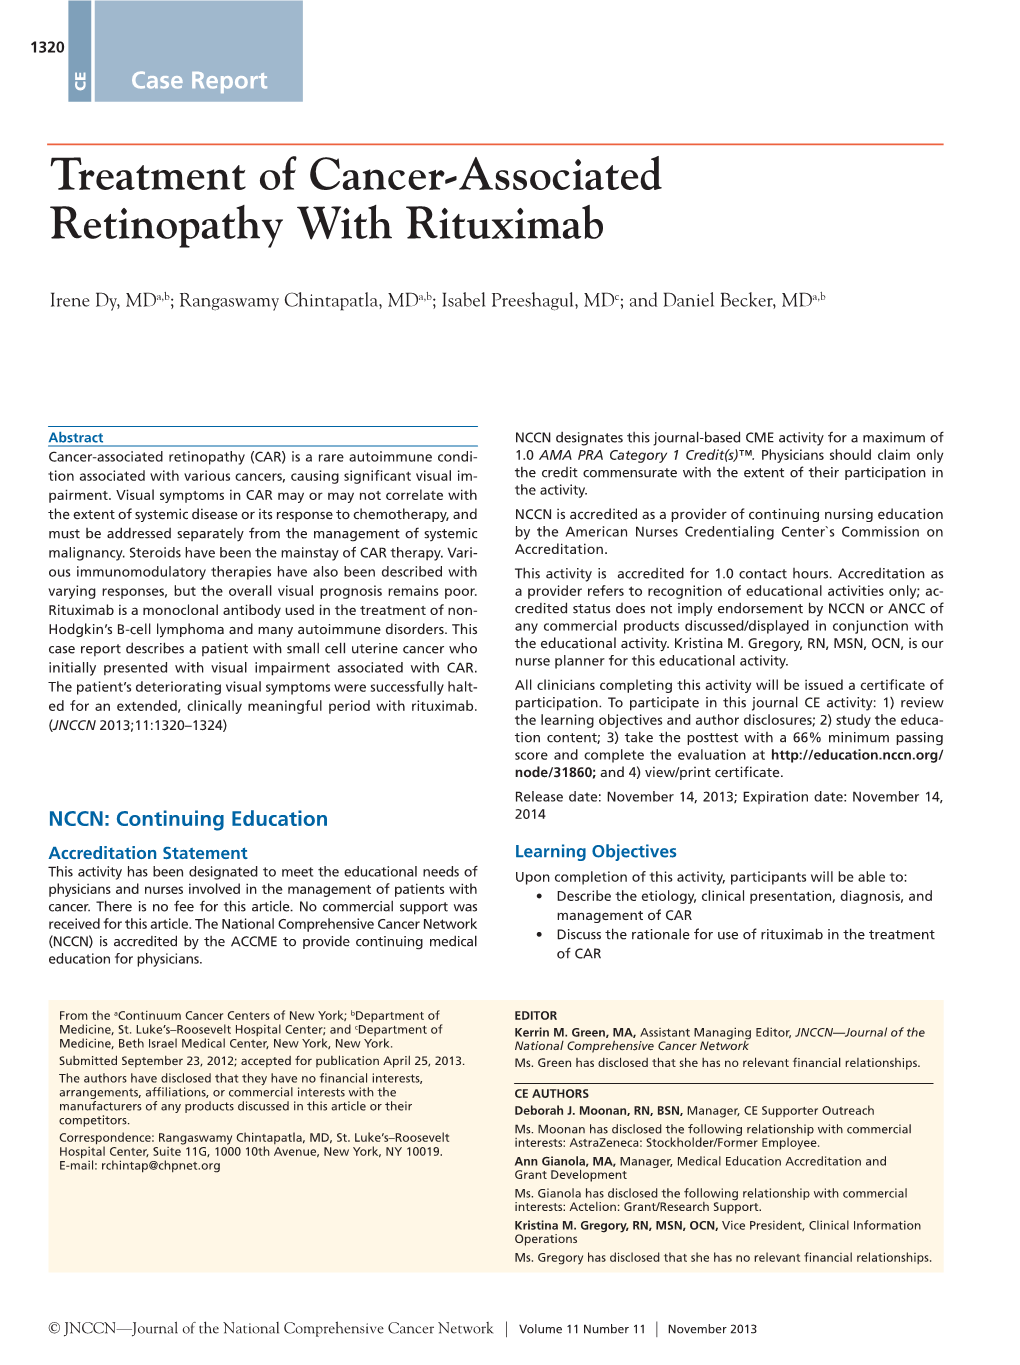 Treatment of Cancer-Associated Retinopathy with Rituximab